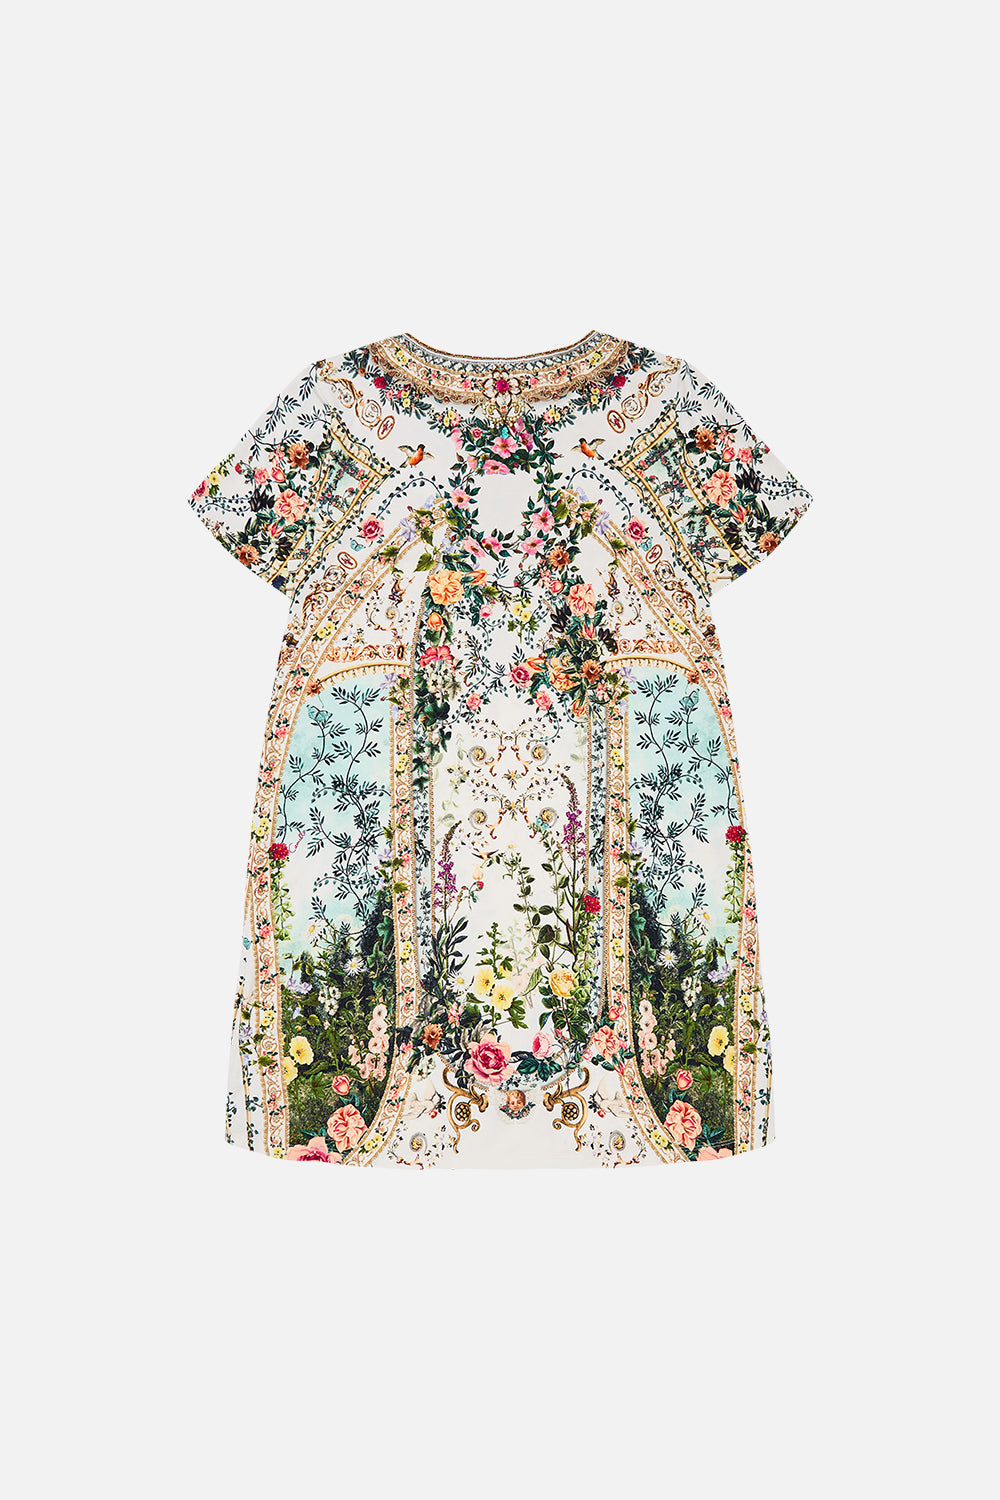 Back product view of Milla by CAMILLA kids floral t shirt dress in Renaissance Romace print 